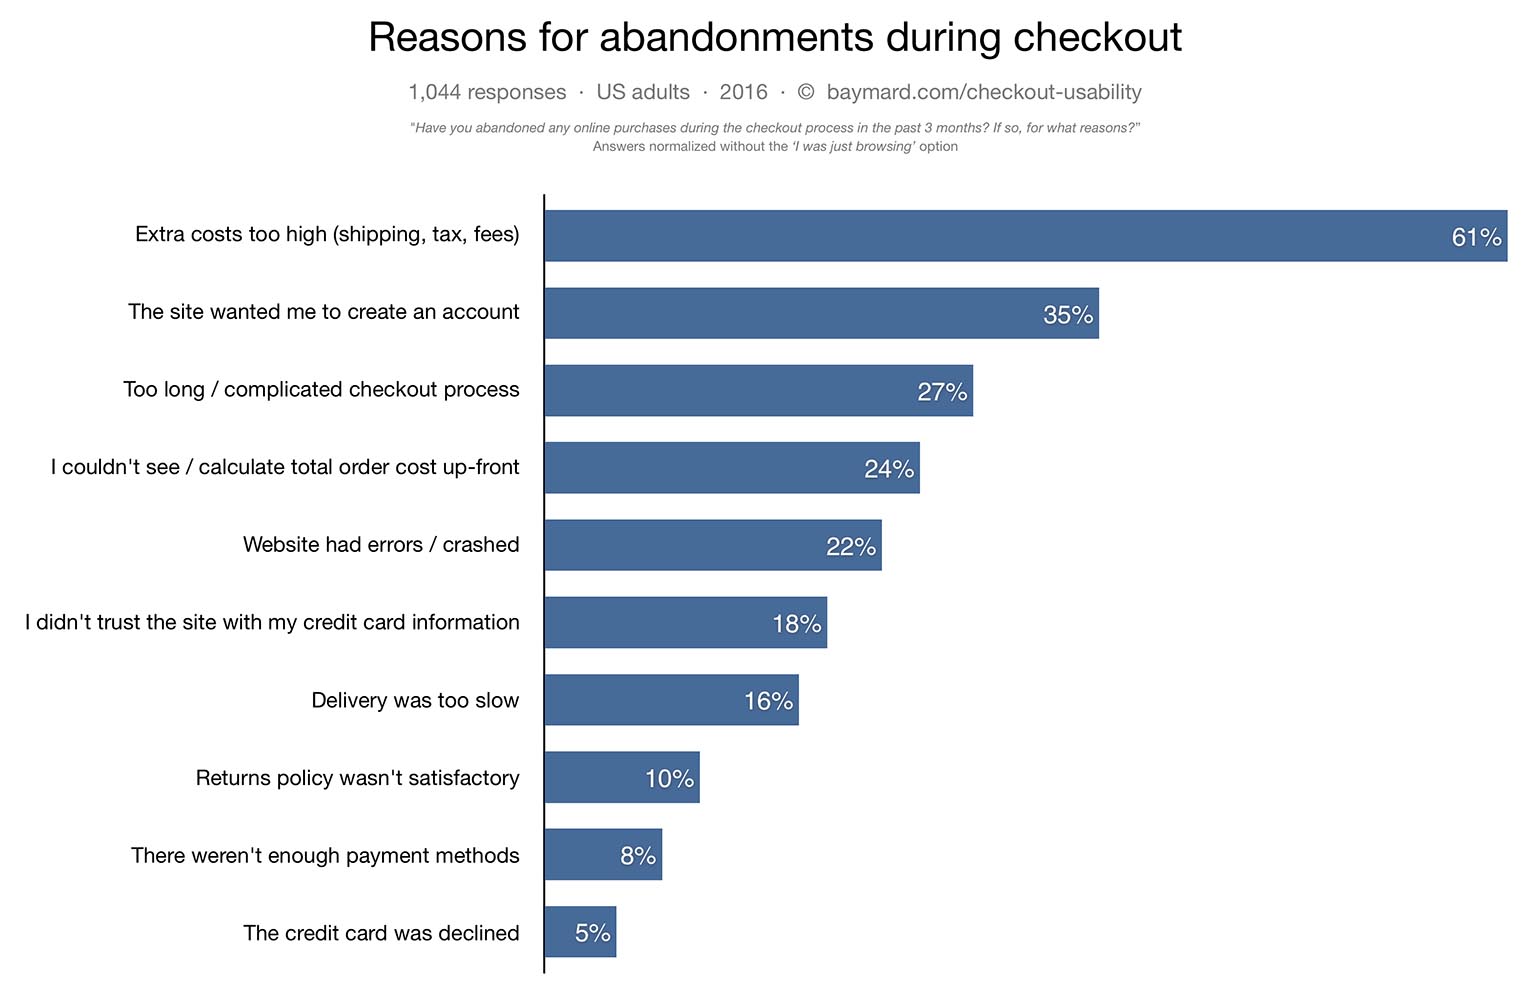 Reasons of abandonments during checkout